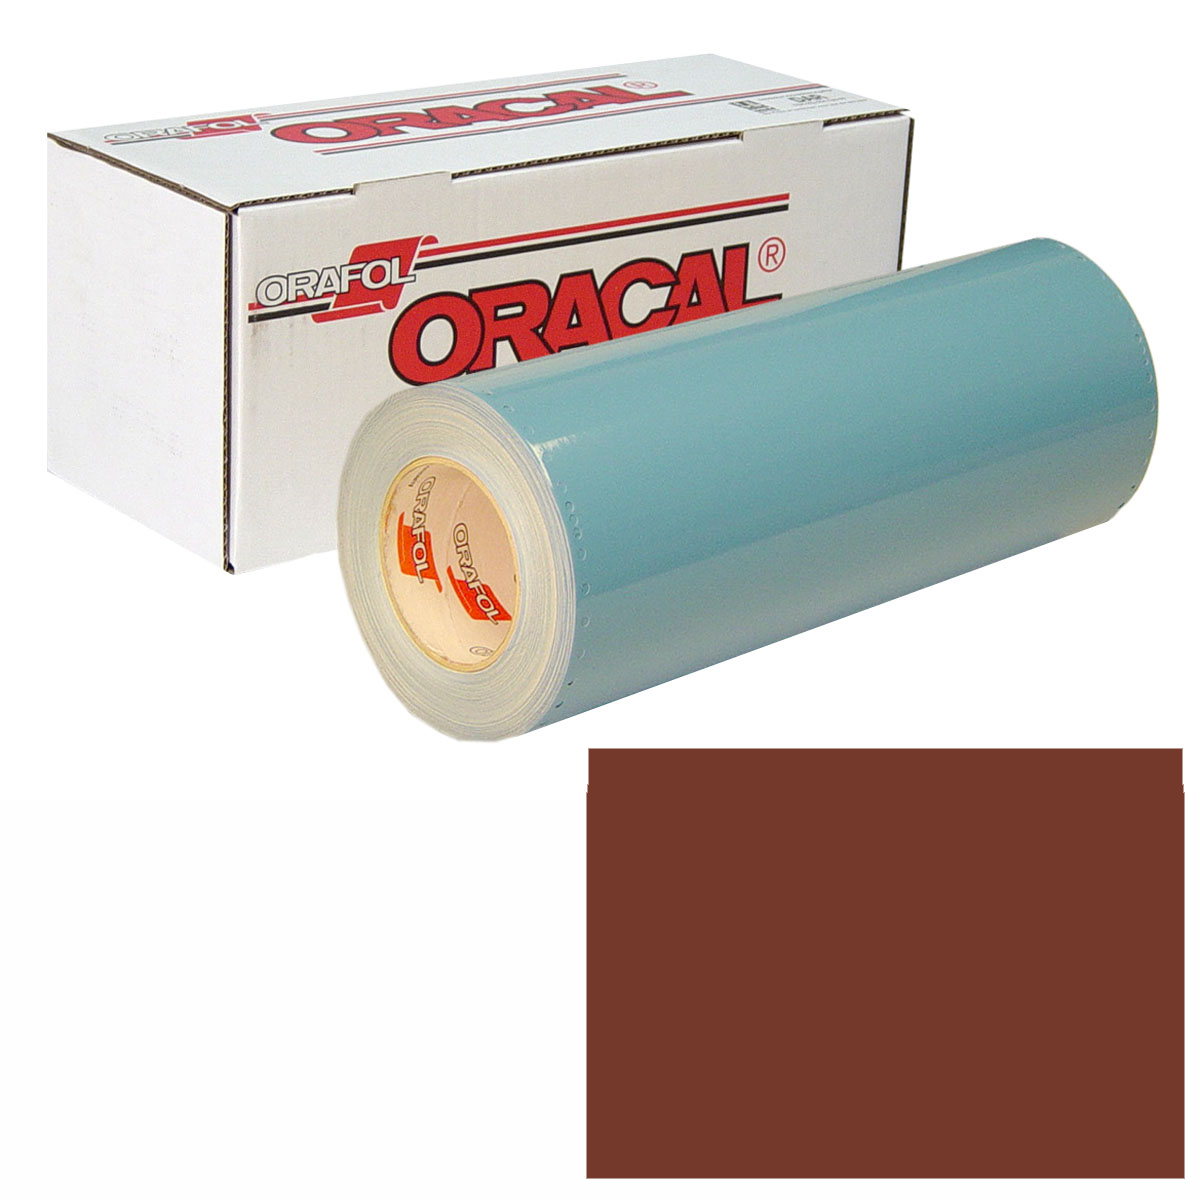 ORACAL 951 30in X 10yd 079 Red Brown